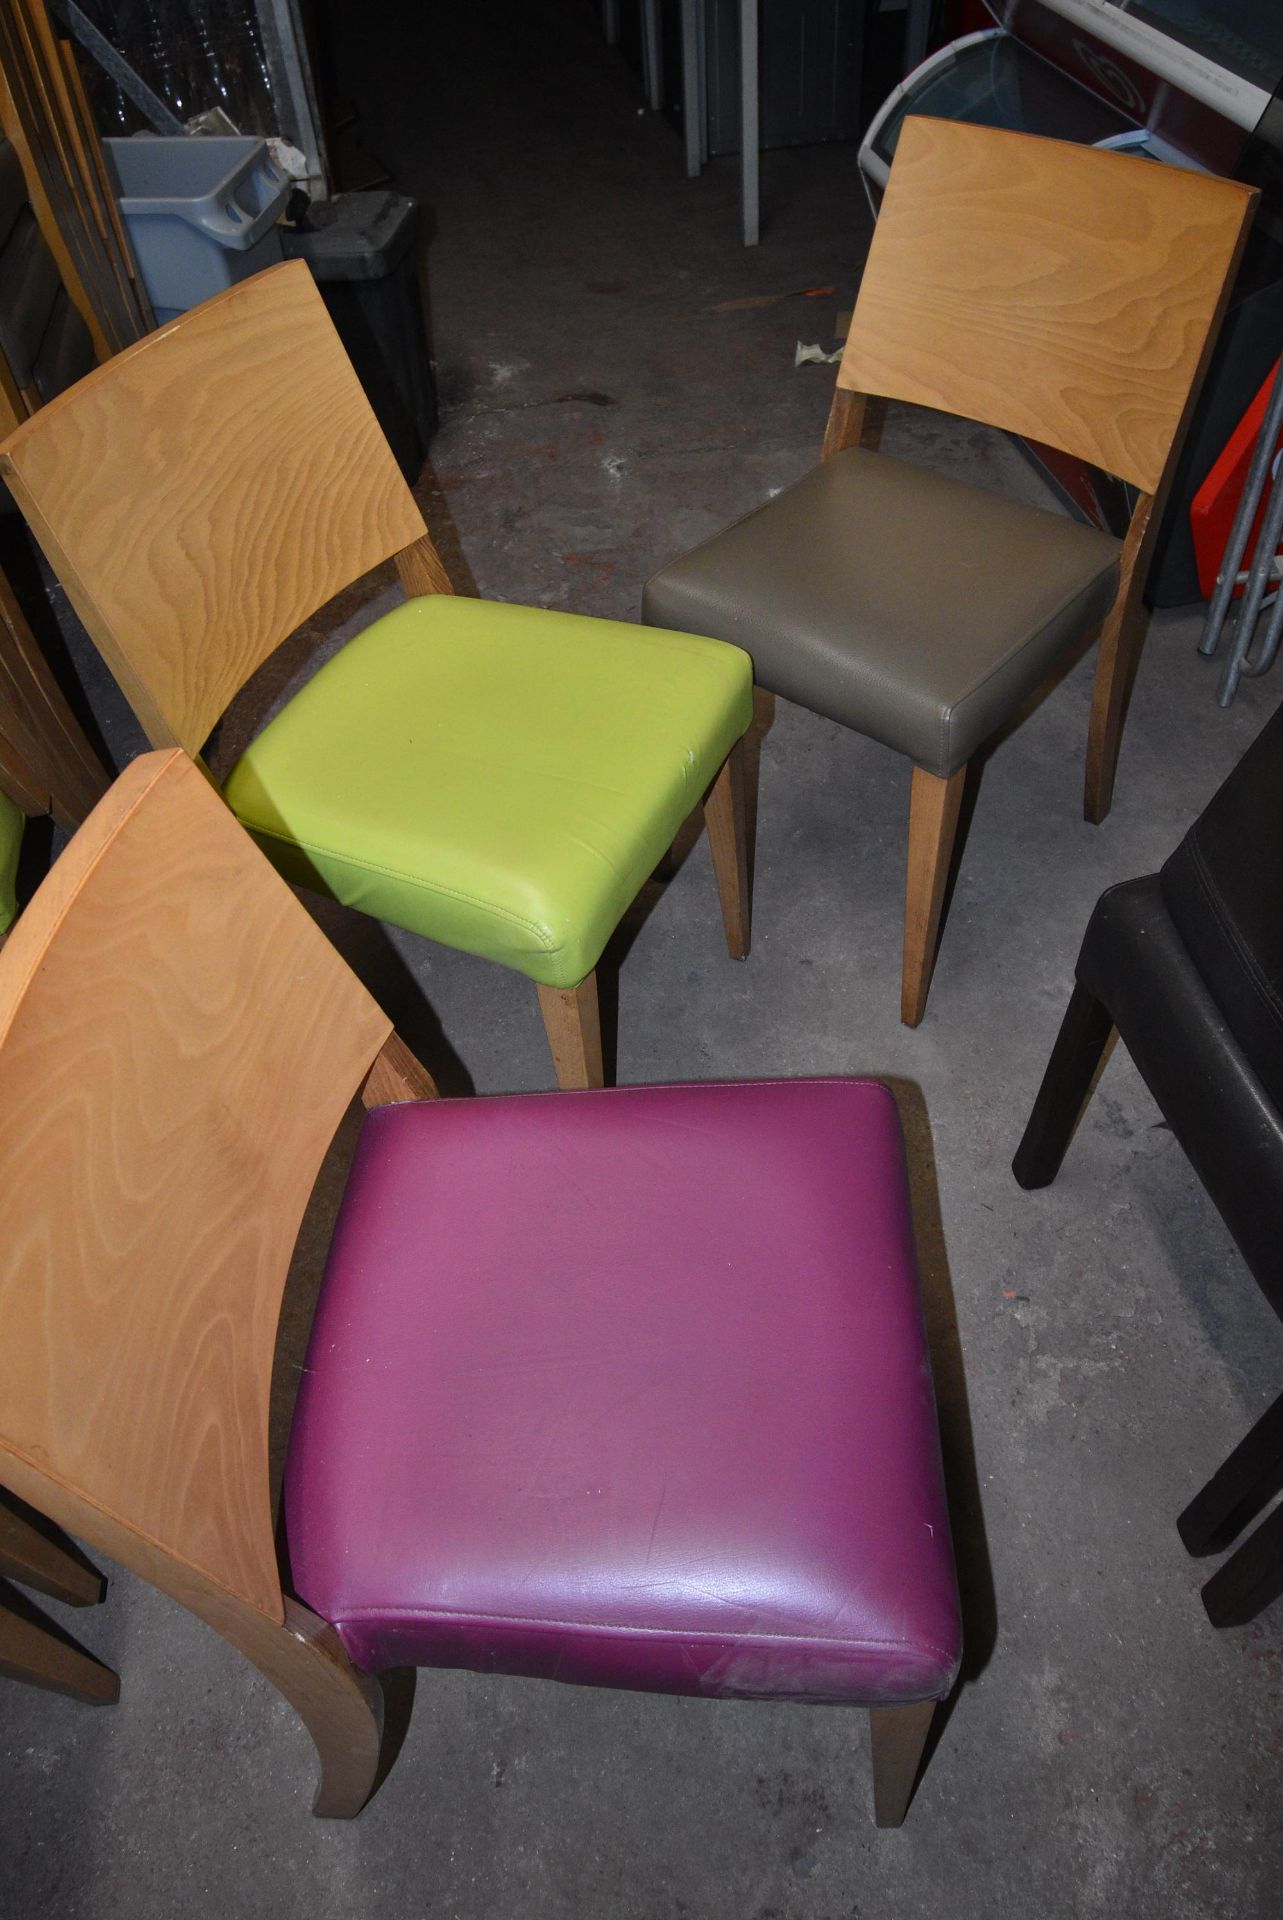 Five Wooden Framed Chairs with Upholstered Seats (assorted colours, first come first serve)